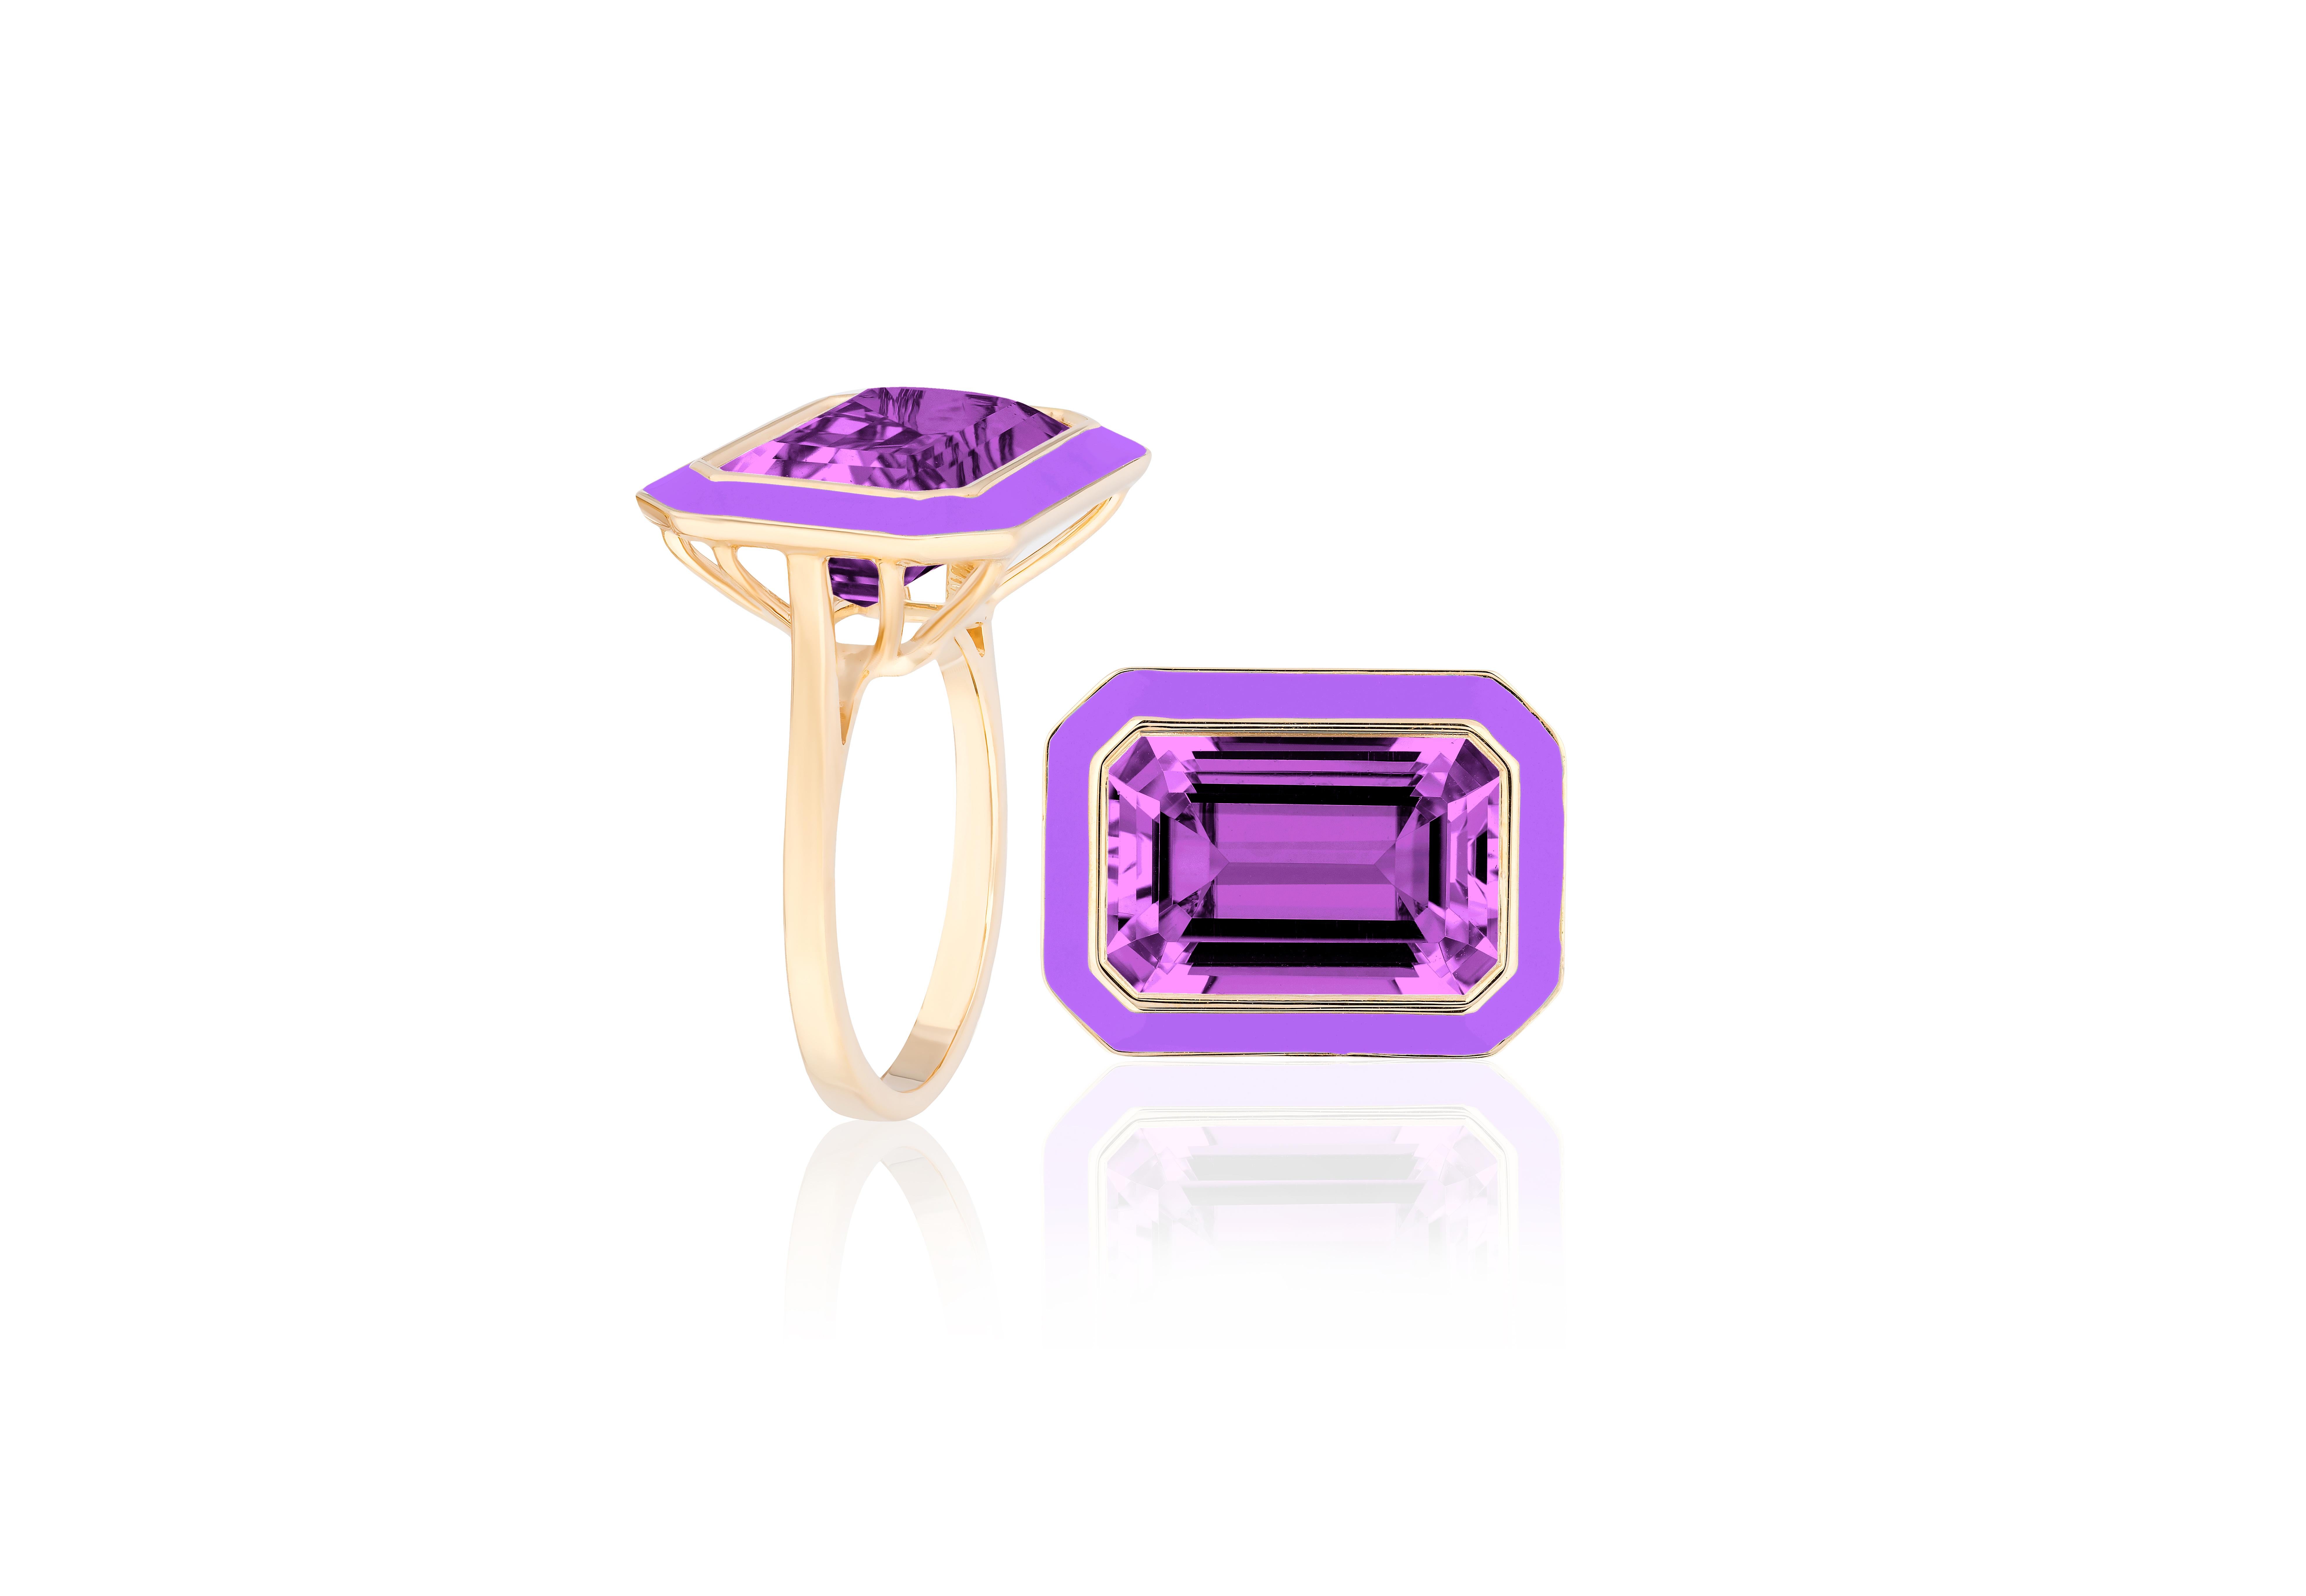 East-West Amethyst Ring with Purple Enamel in 18K Yellow Gold, from 'Queen' Collection. The combination of enamel and Amethyst represents power, richness and passion of a true Queen. The feeling of luxury is what we’re aiming for. This will be your